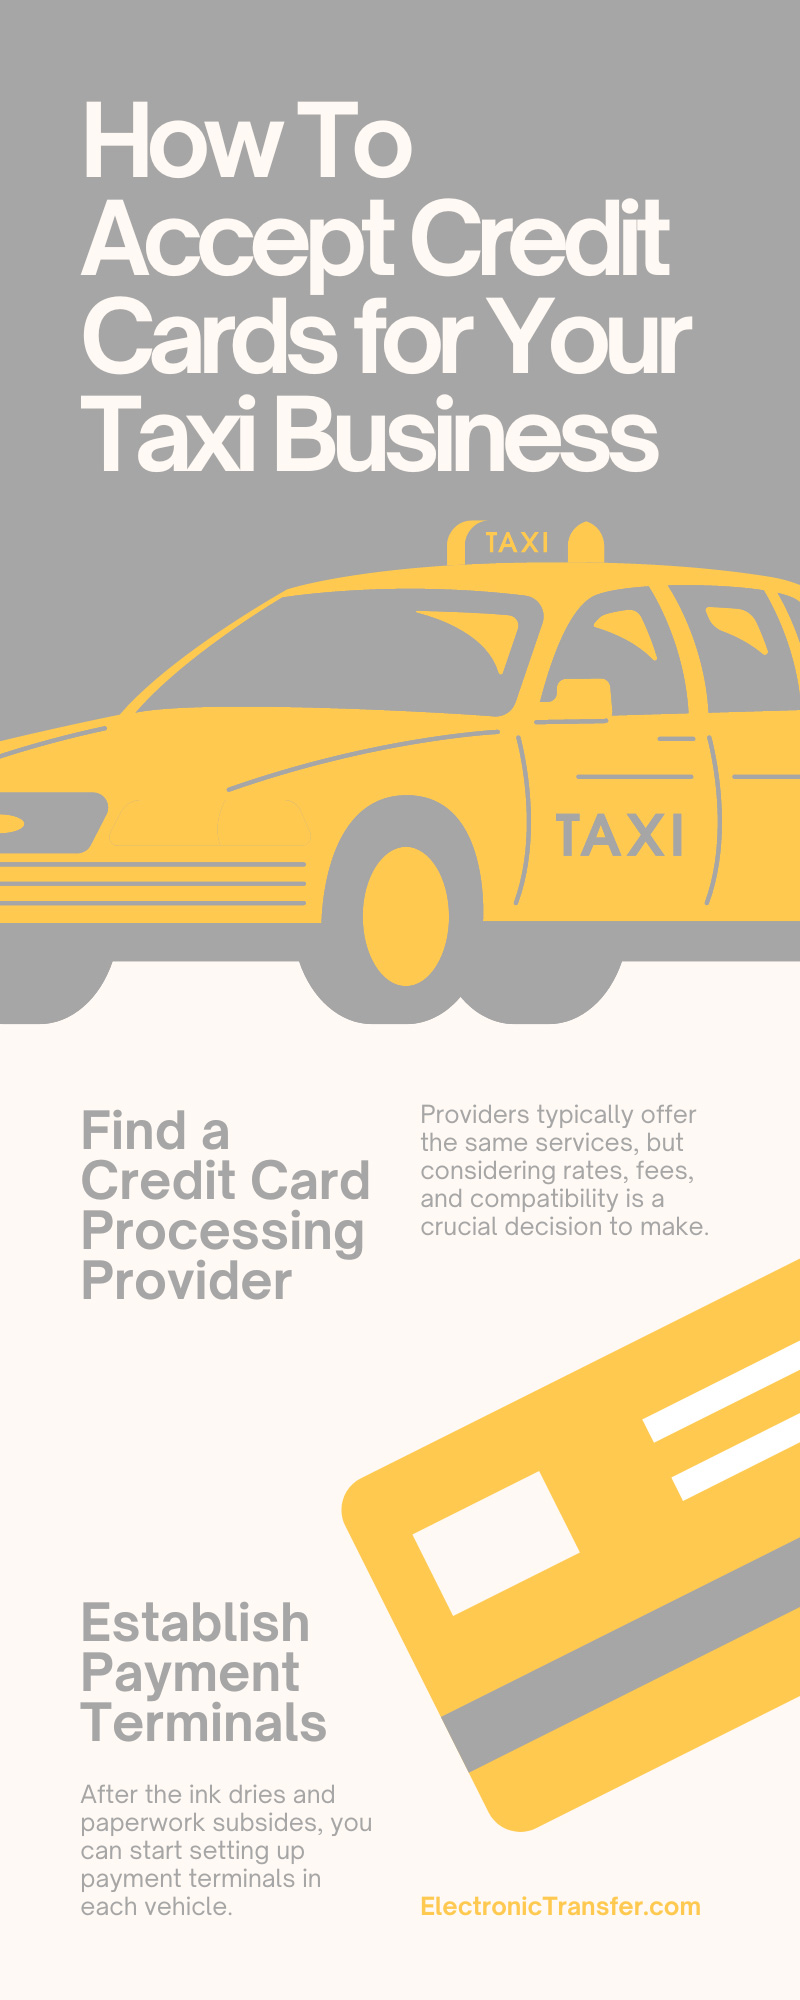 ElectronicTransferInc 148504 Credit Cards Taxi infographic2